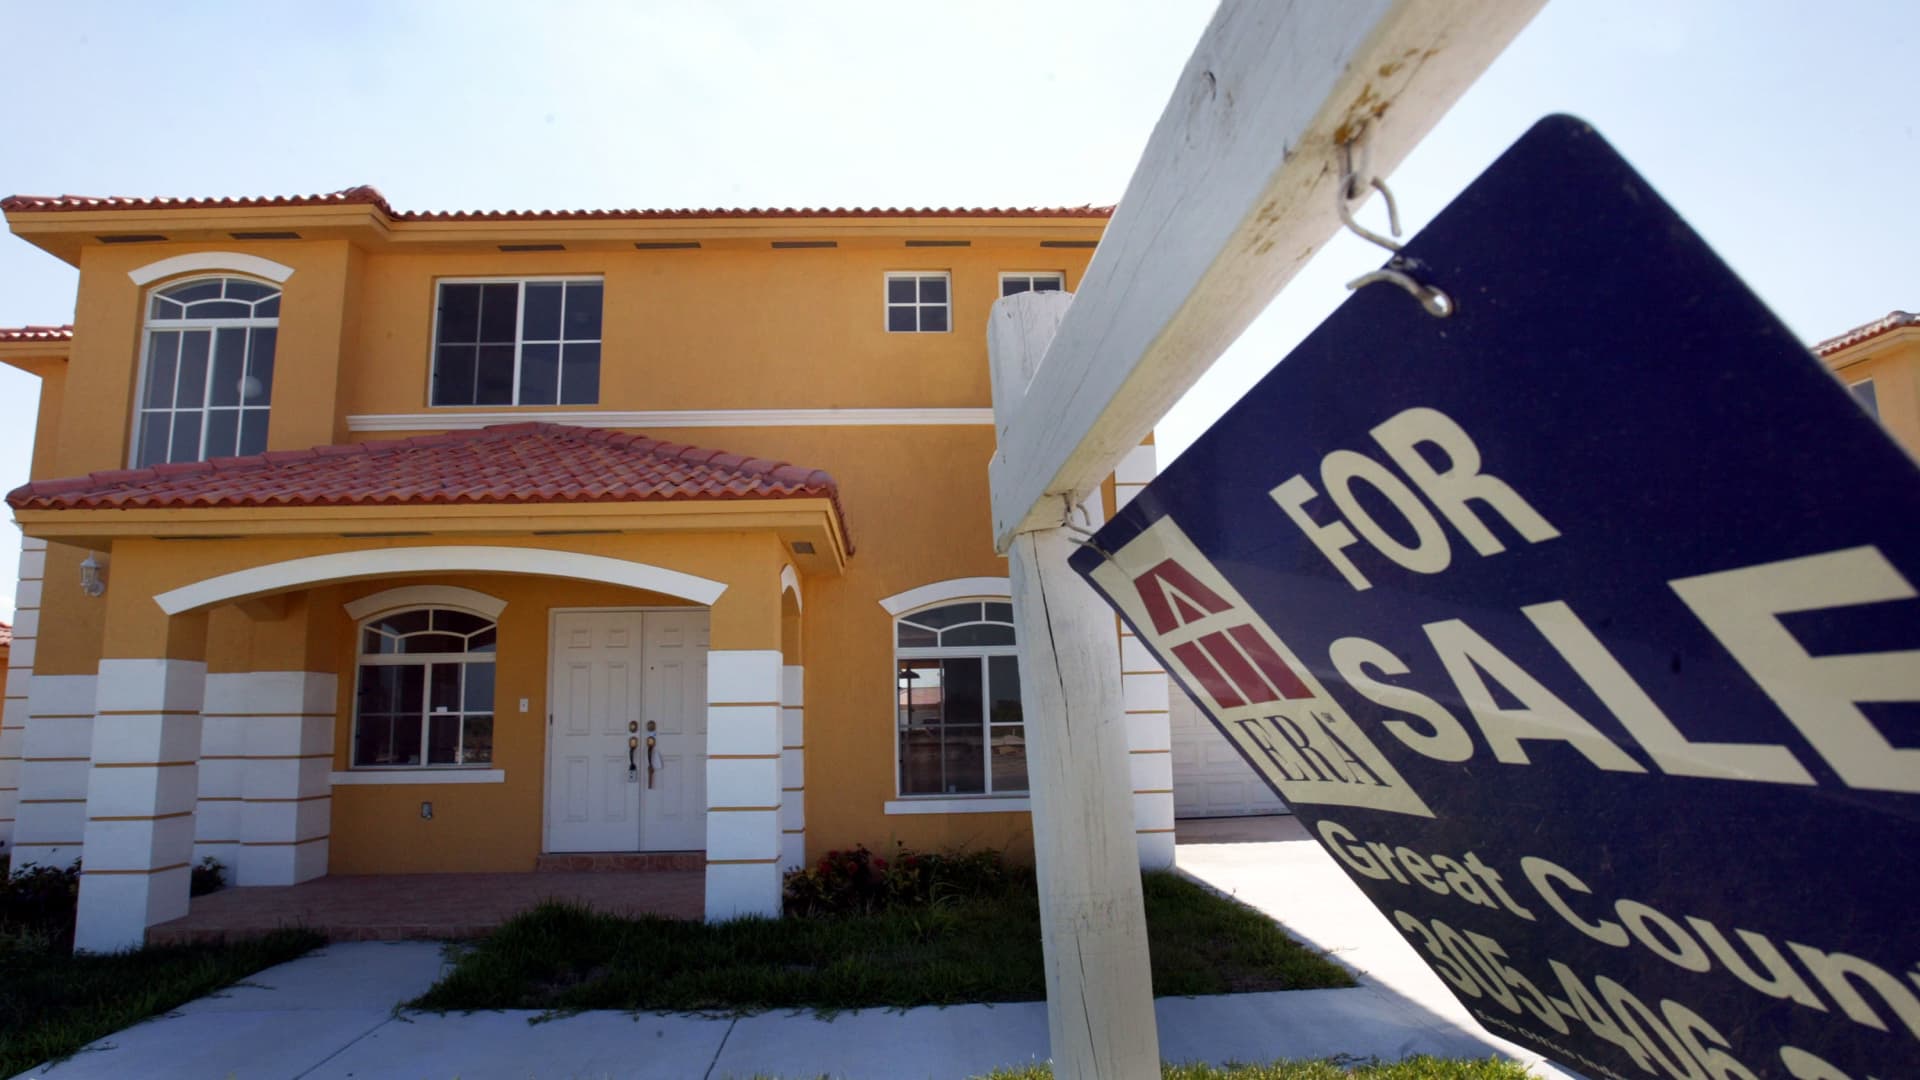 Falling mortgage rates are pulling buyers back into the housing market